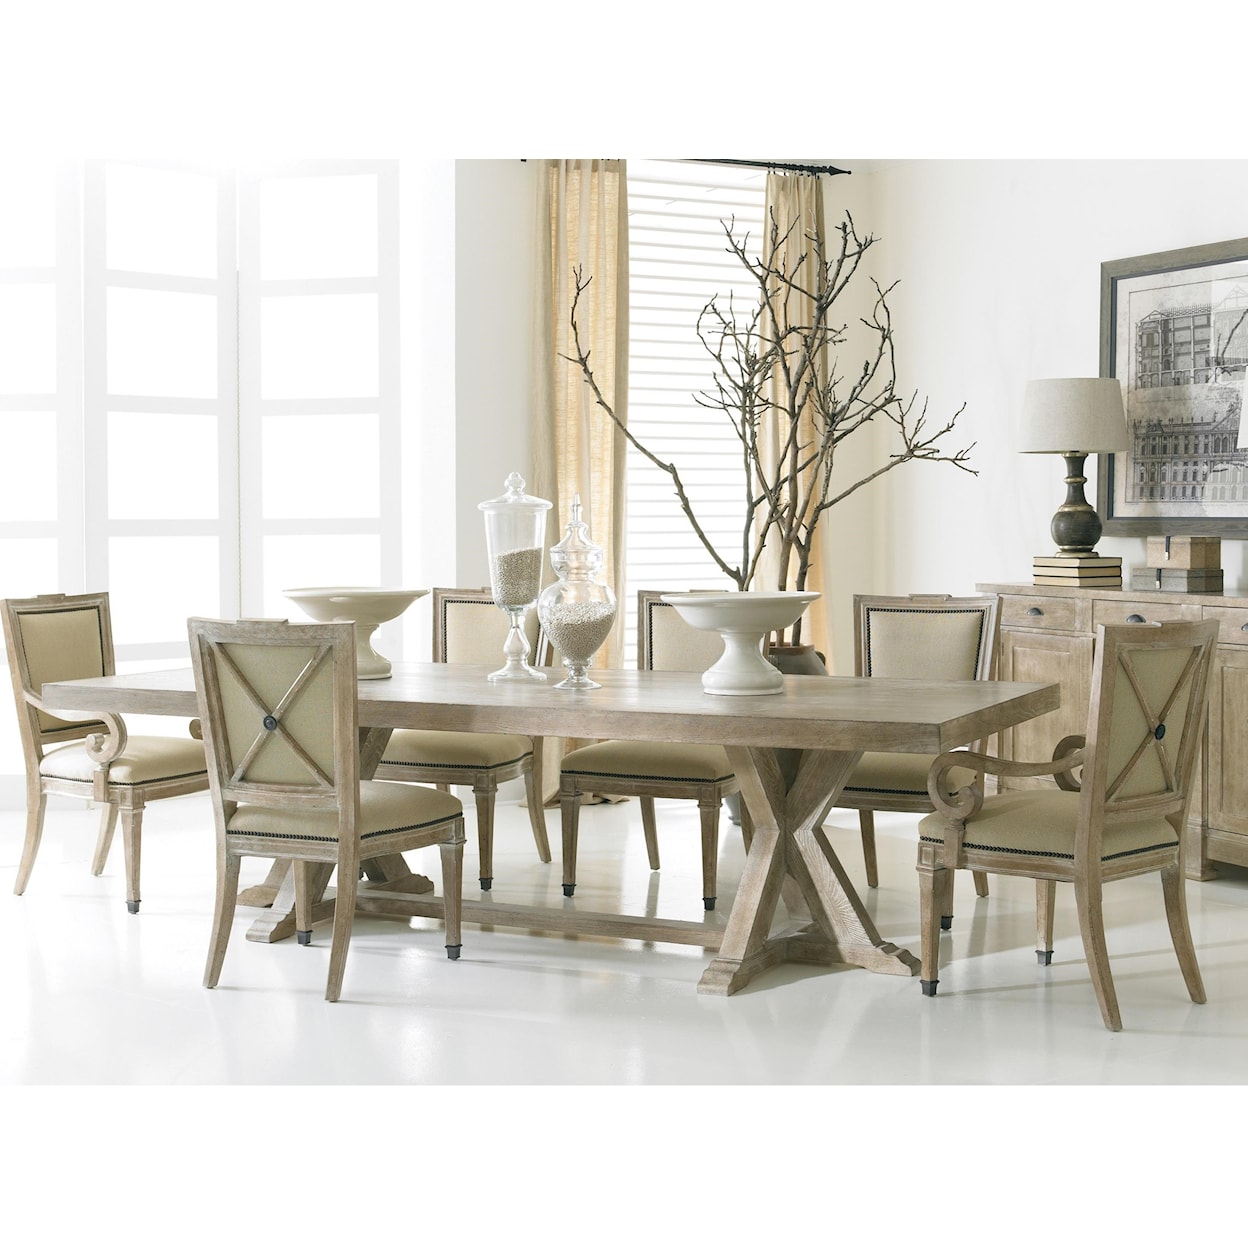 Hickory White Urban Loft Collection 7 Piece Table & Chair Set